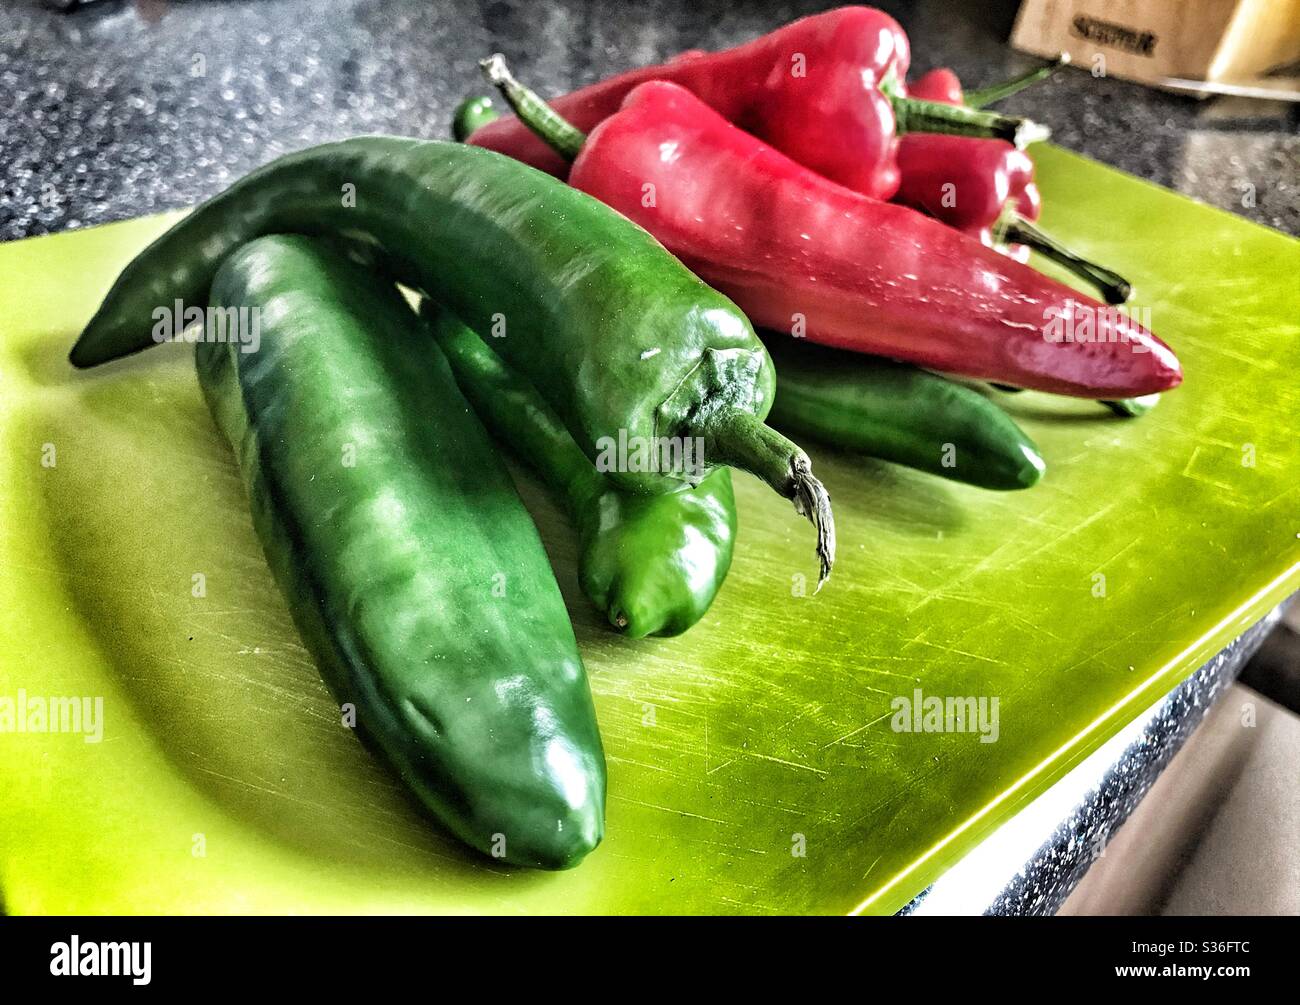 Green Chopping Board With Red and Green Chillis on it Stock Photo